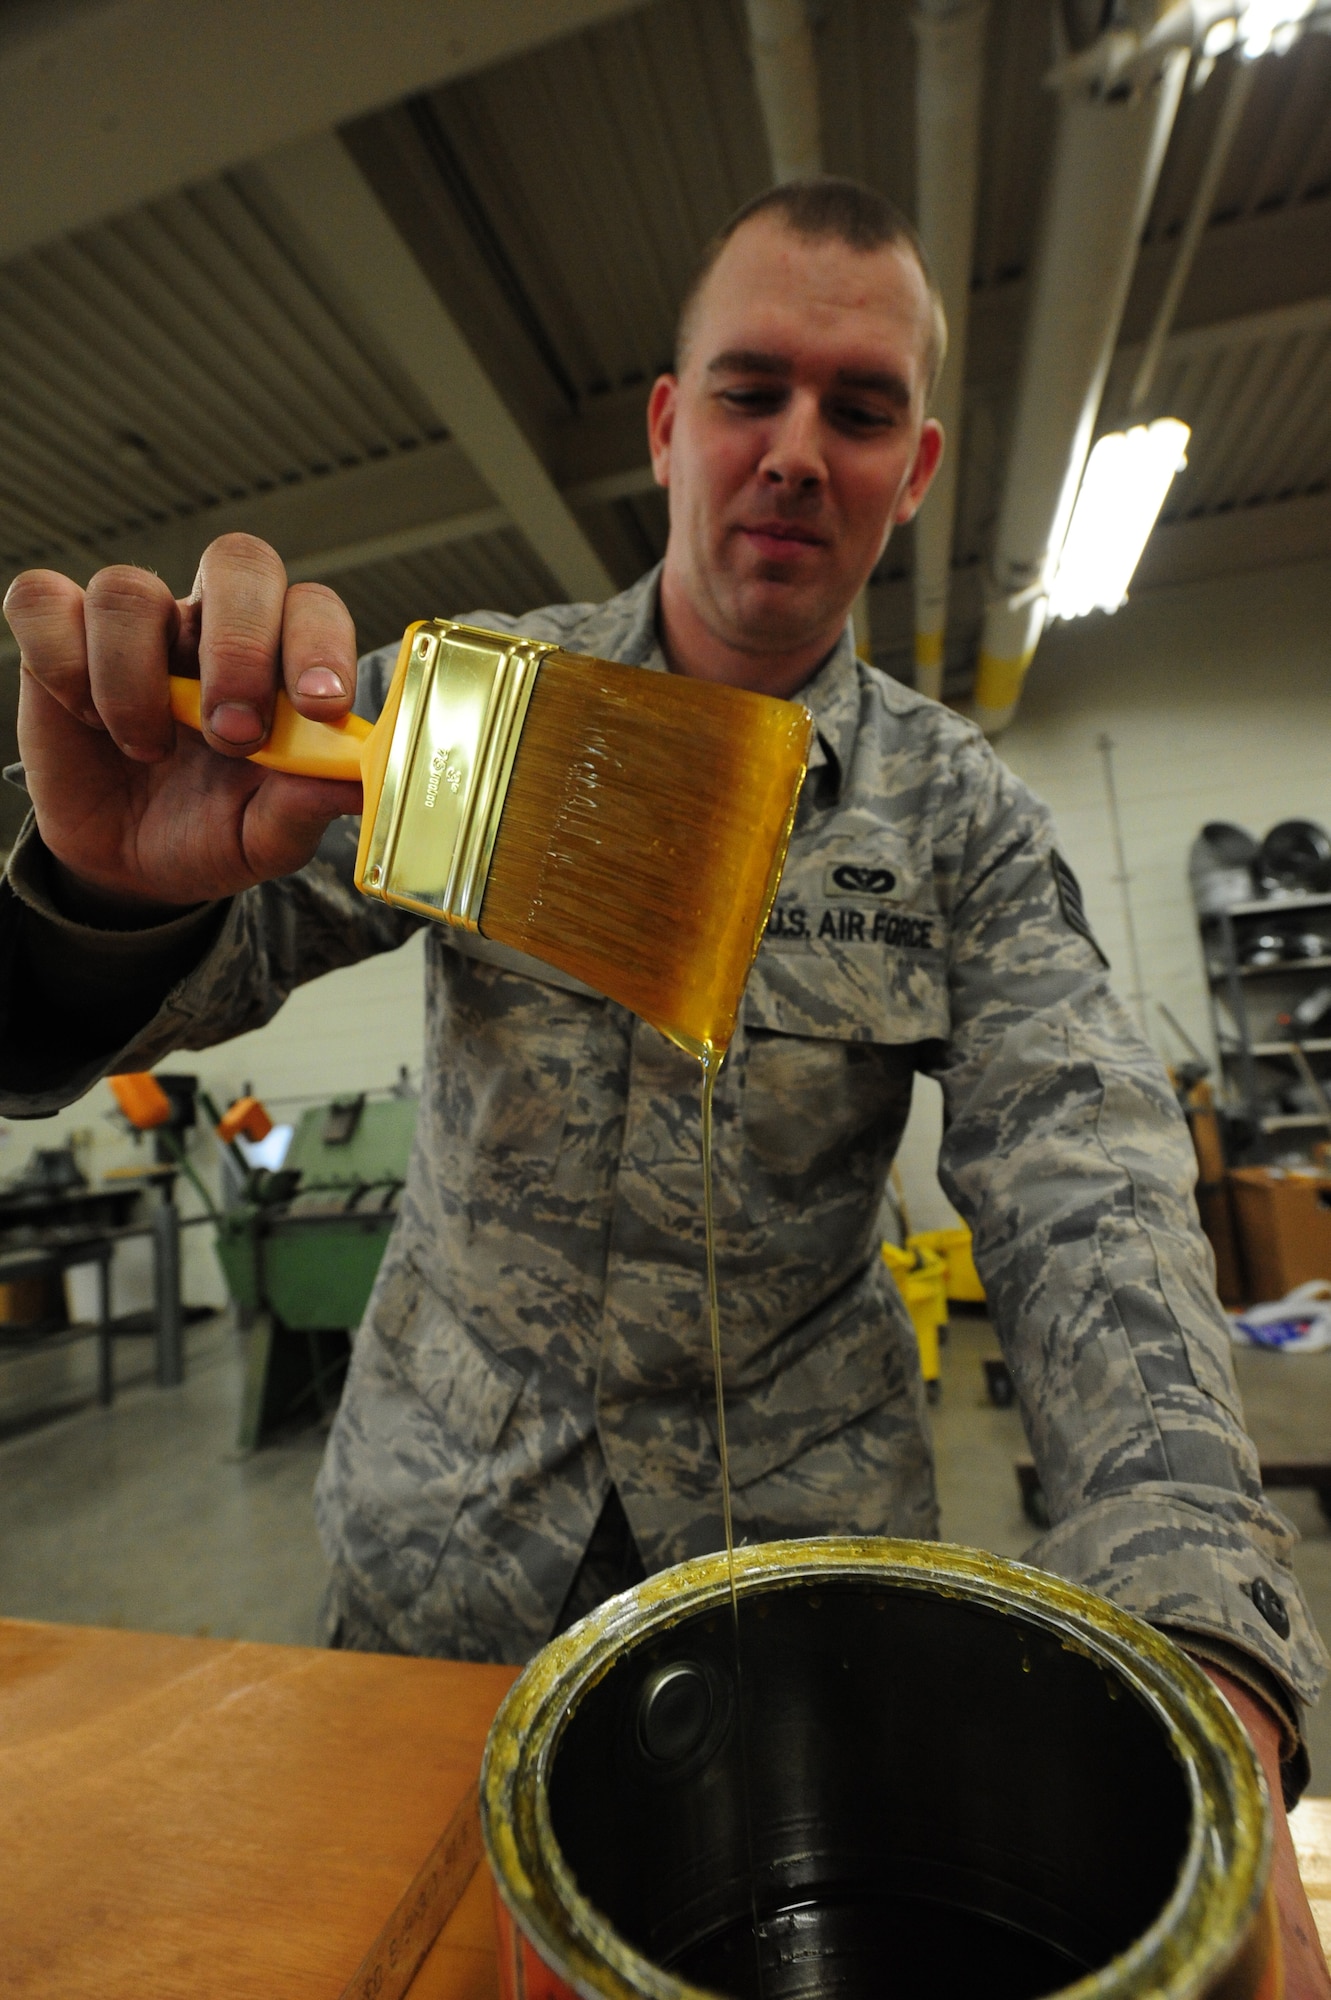 WHITEMAN AIR FORCE BASE, Mo. -- Staff Sgt. Adam Boyd, 509th Civil Engineer Squadron structural supervisor, dips a brush in polyurethane before polishing a wooden door, Feb. 27. The polyurethane prevents moisture from absorbing into the wood. (U.S. Air Force photo/Staff Sgt. Nick Wilson) (Released)